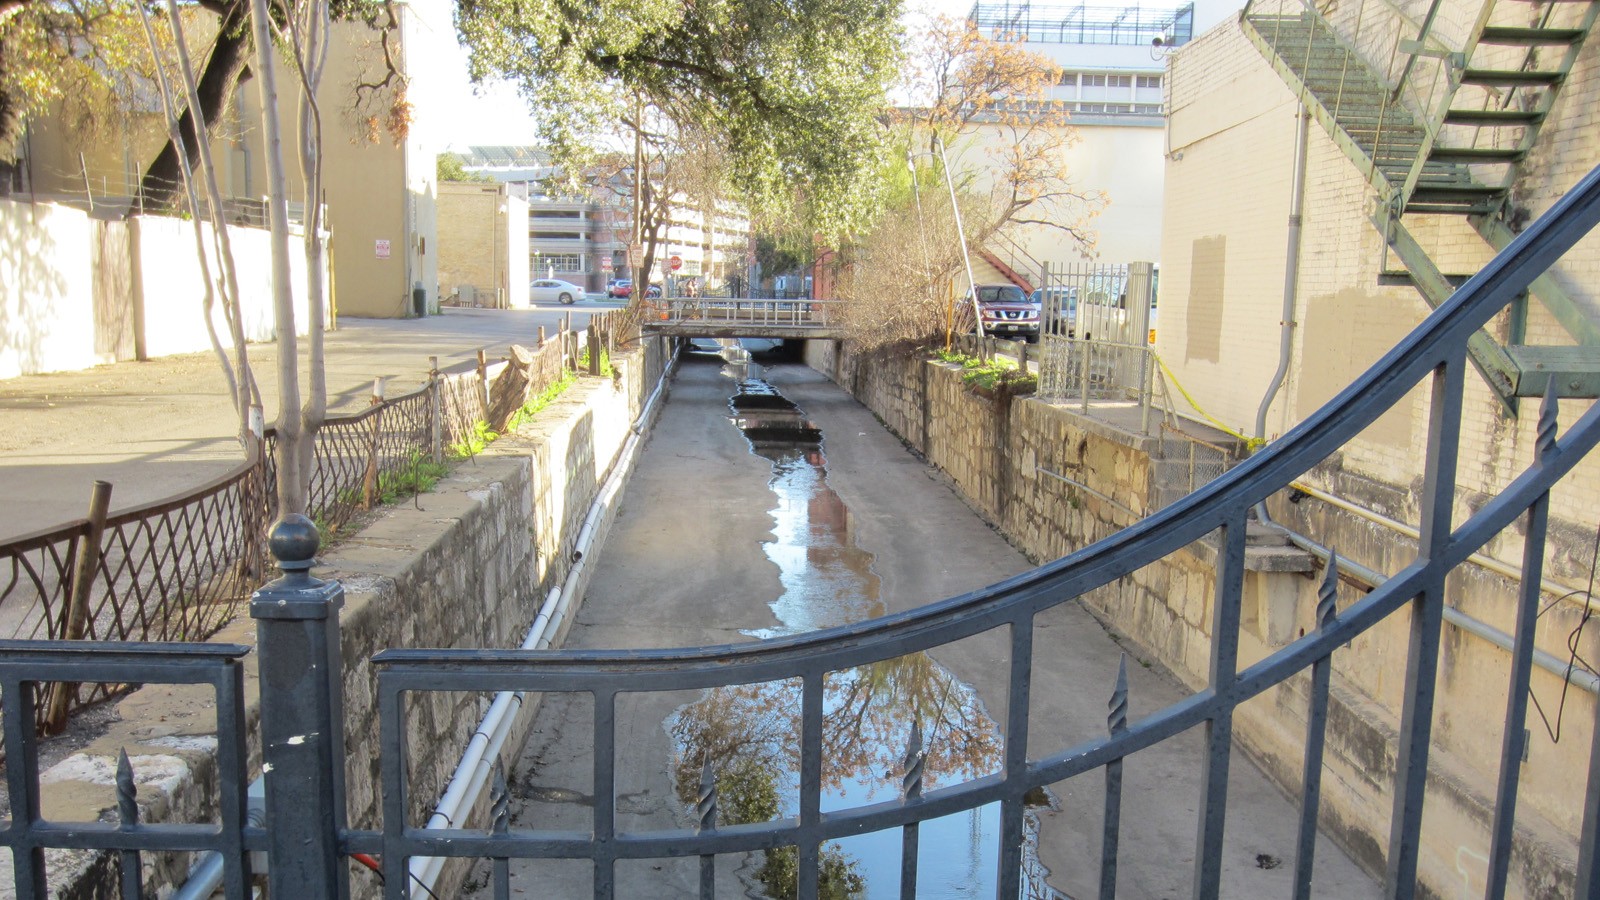 San Pedro Creek adjacent to the Spanish Governor’s Palace (present day) - Photo by Charles A. Birnbaum